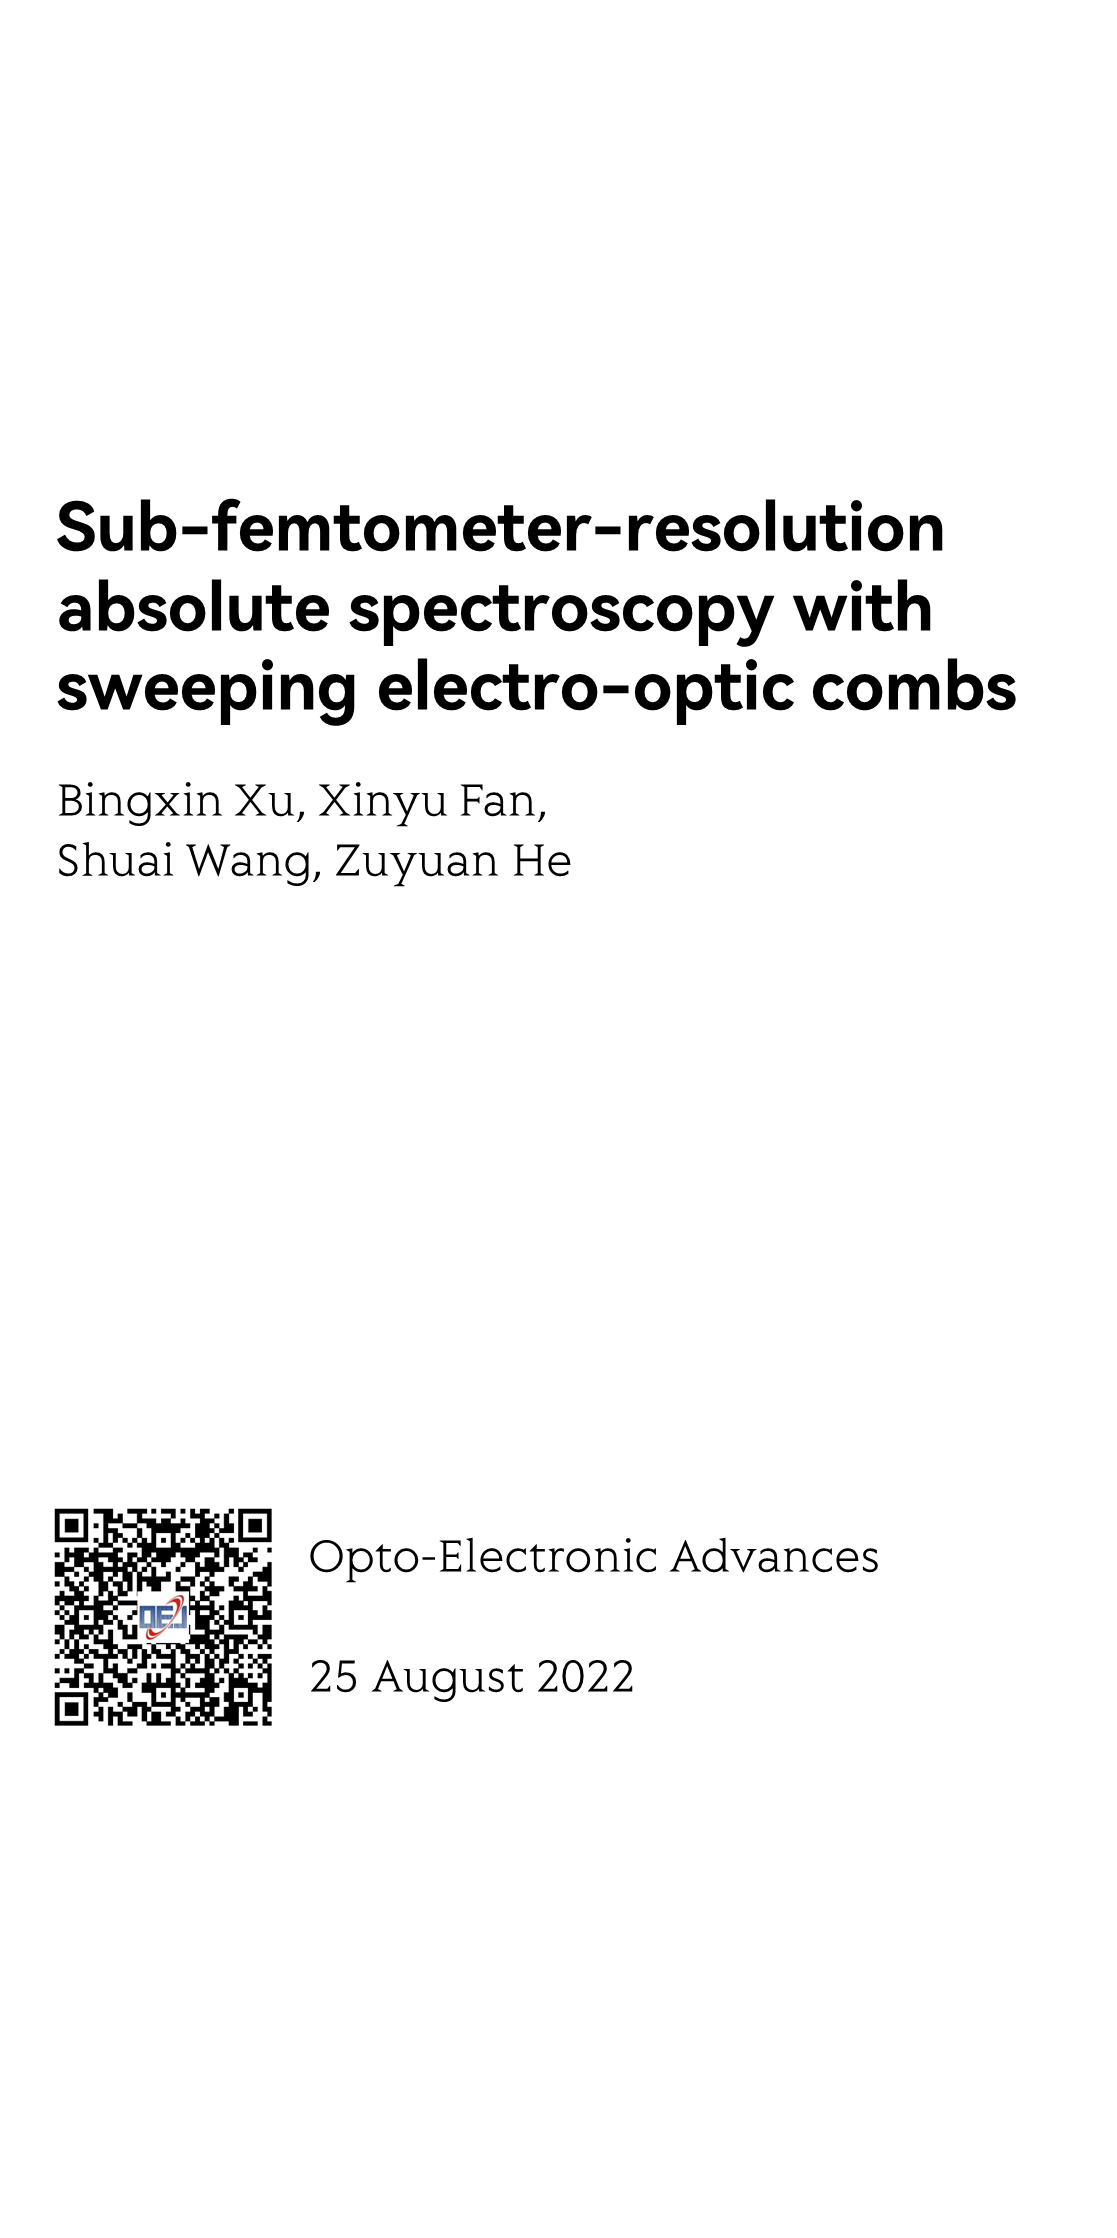 Sub-femtometer-resolution absolute spectroscopy with sweeping electro-optic combs_1